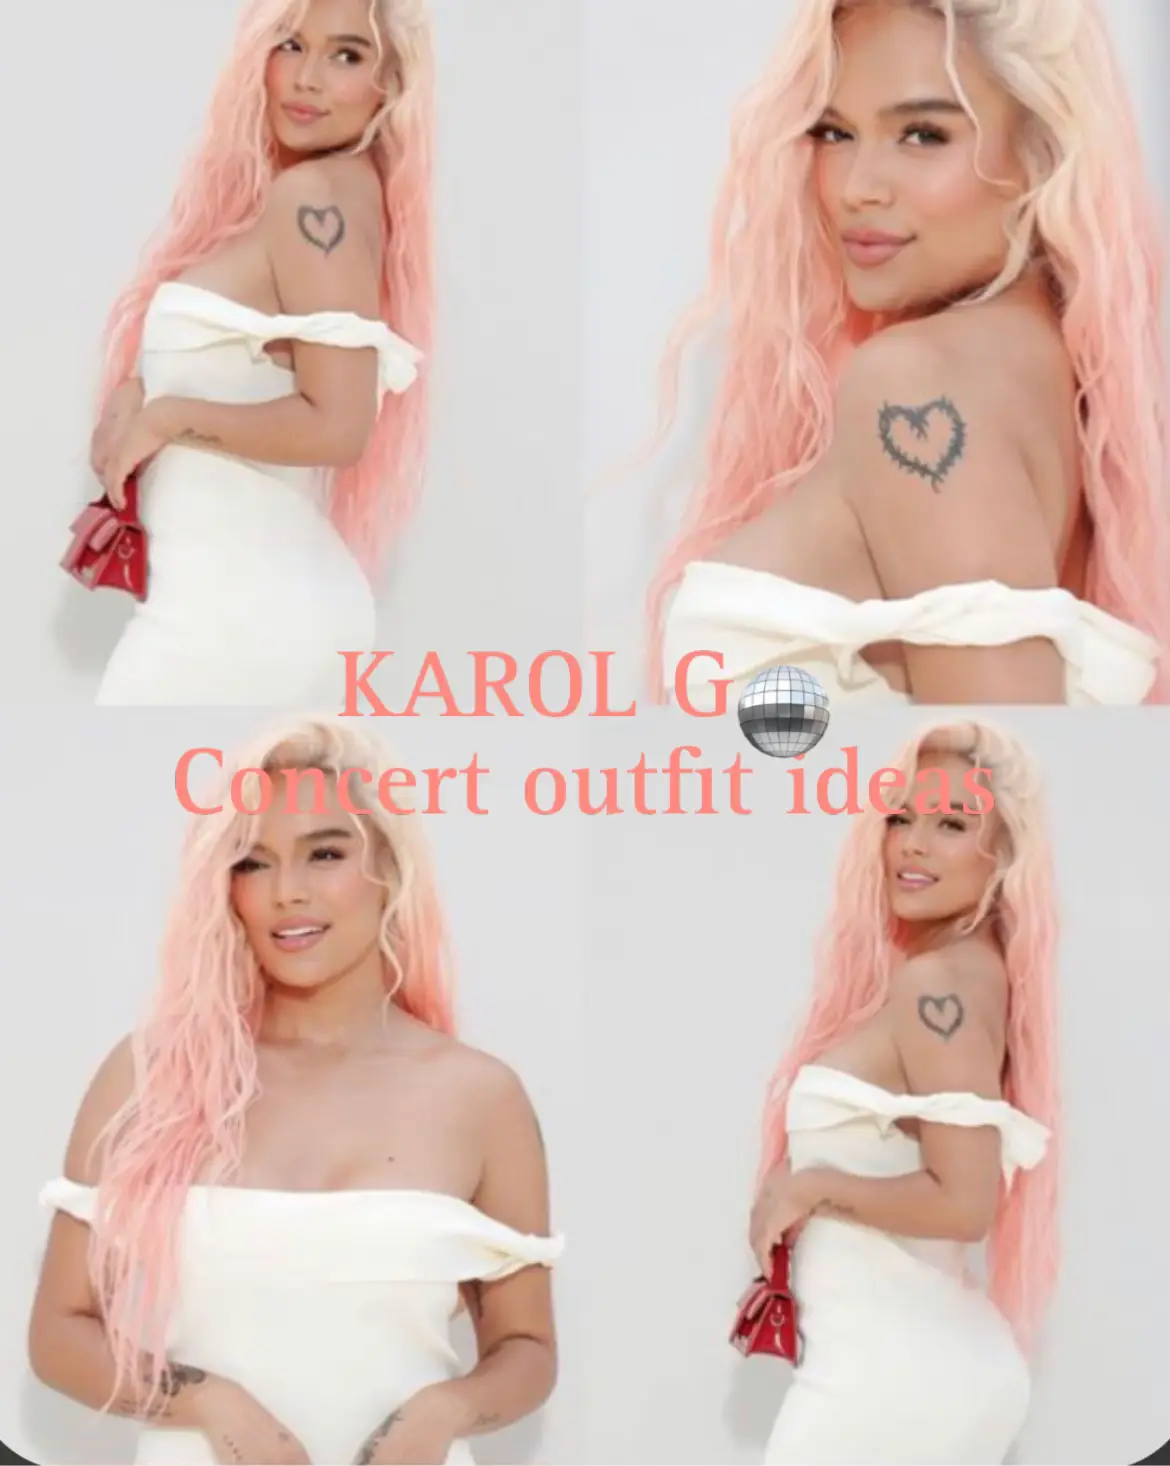 Come to the Karol G concert with me! ✨, Gallery posted by Brenda